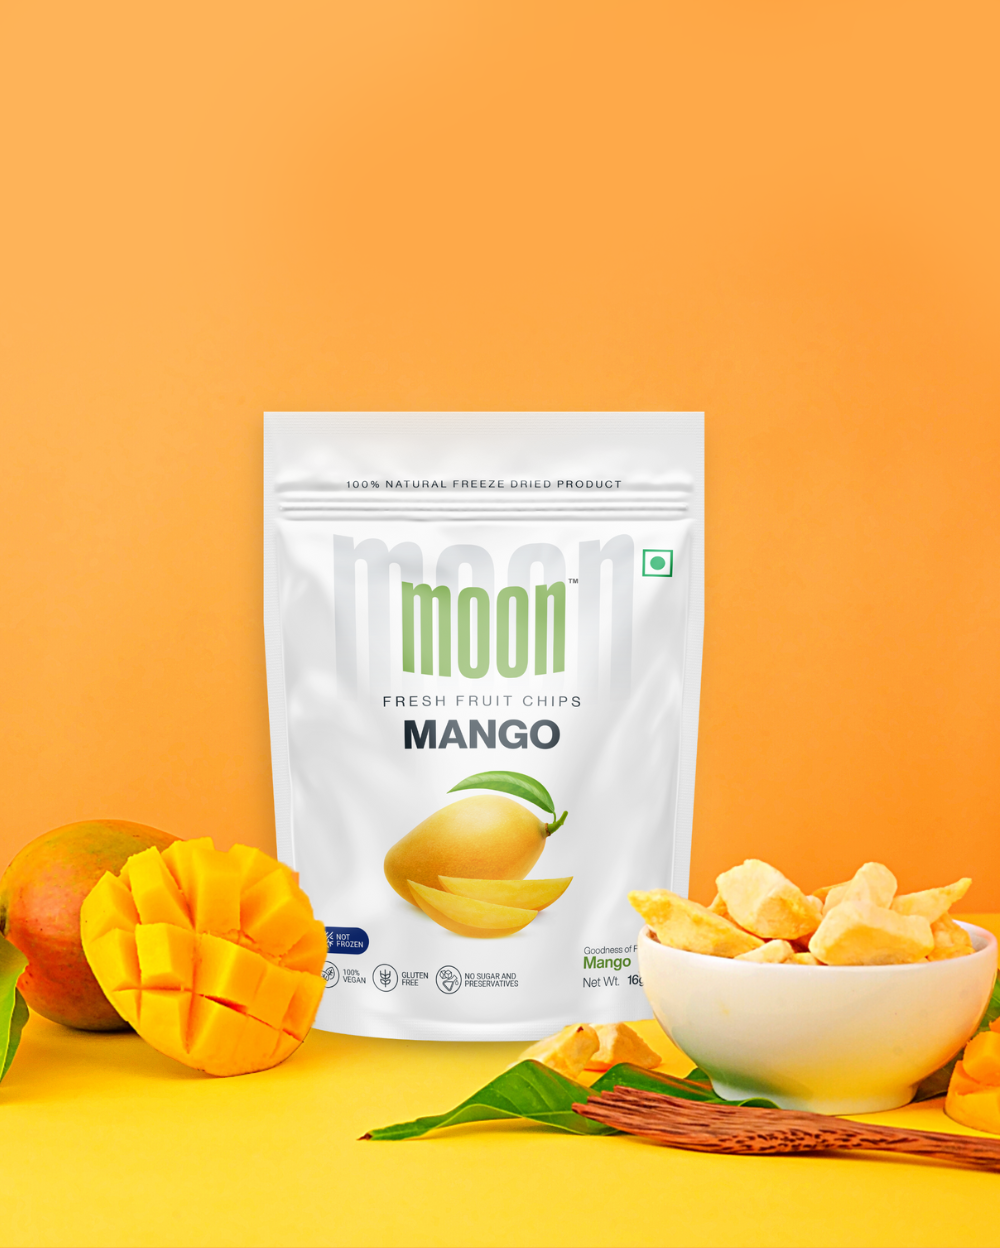 Packaged Moon Freeze Dried Strawberry + Mango fruit chips and freeze-dried strawberry slices displayed with fresh mango slices on a vibrant orange background, offering a healthy snack option.